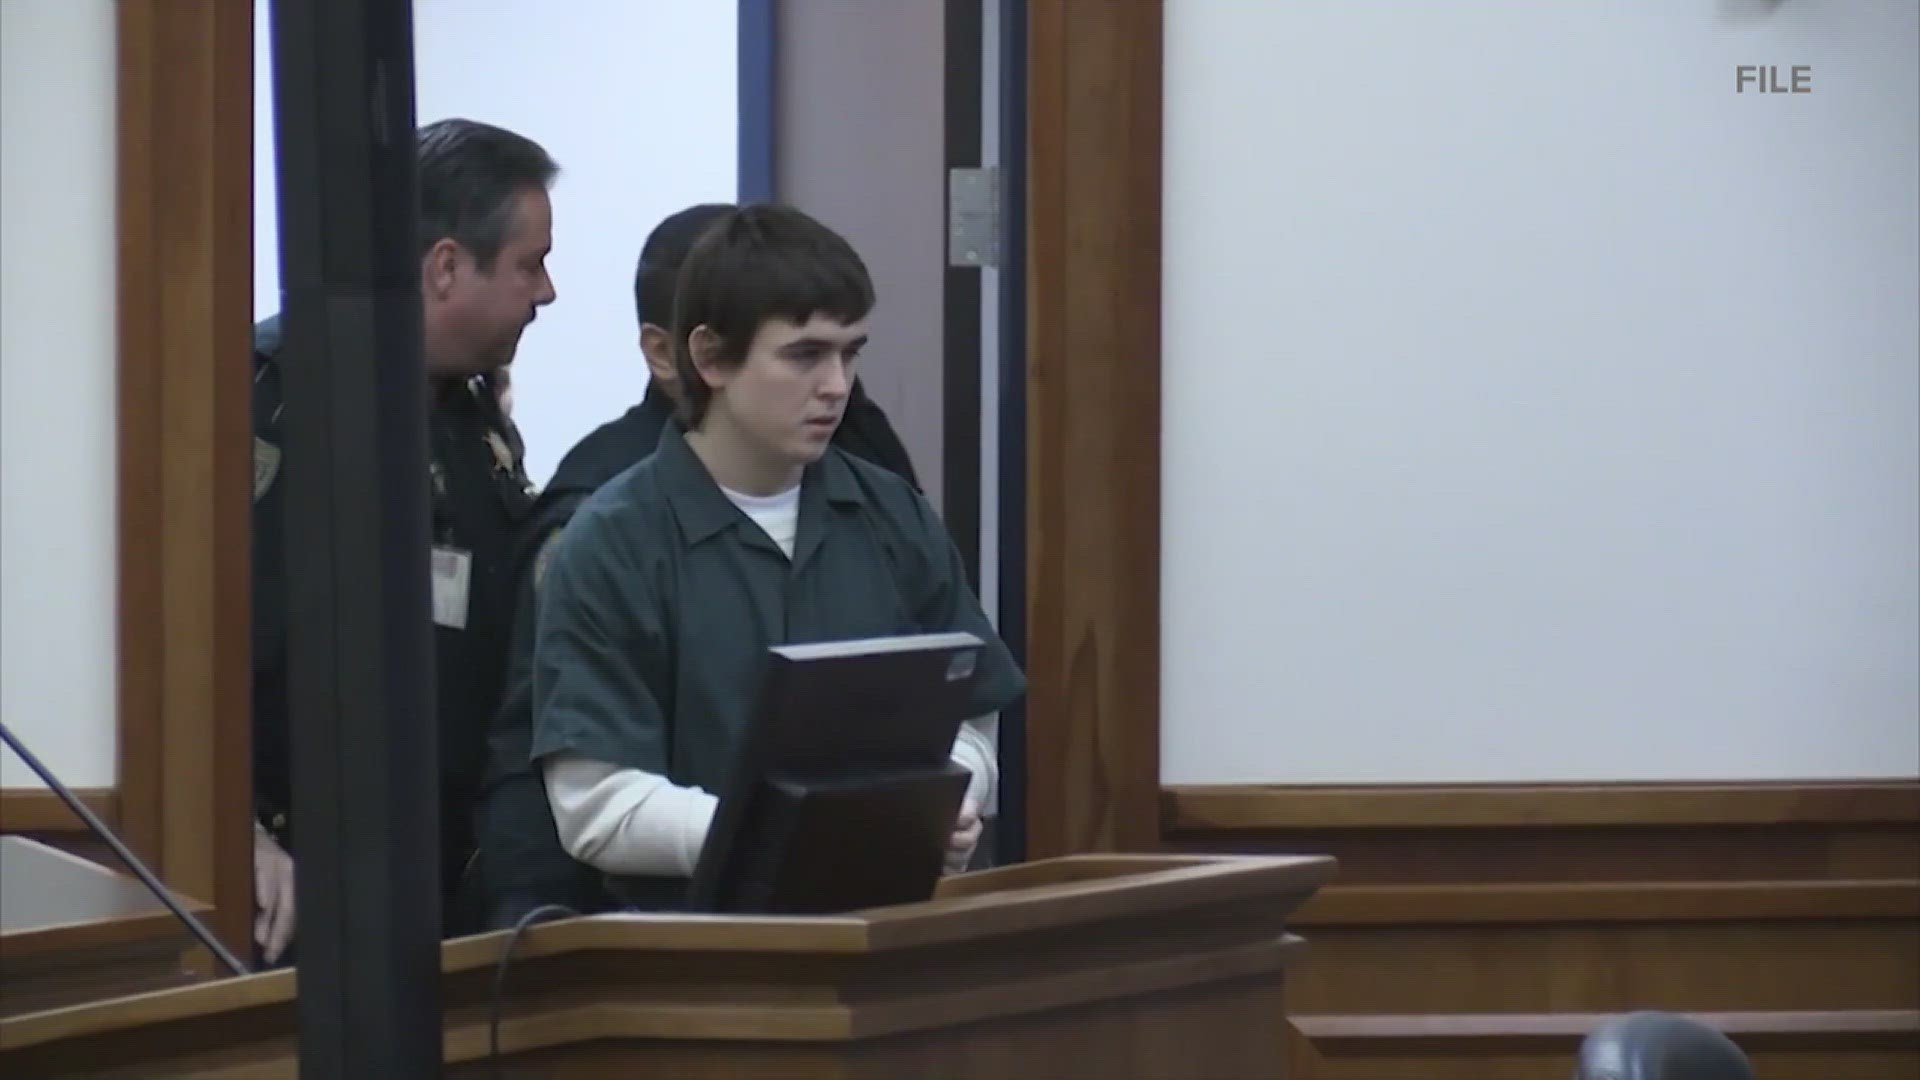 A judge in Galveston County ordered a new hearing for shooter, who was declared incompetent to stand trial, Thursday.